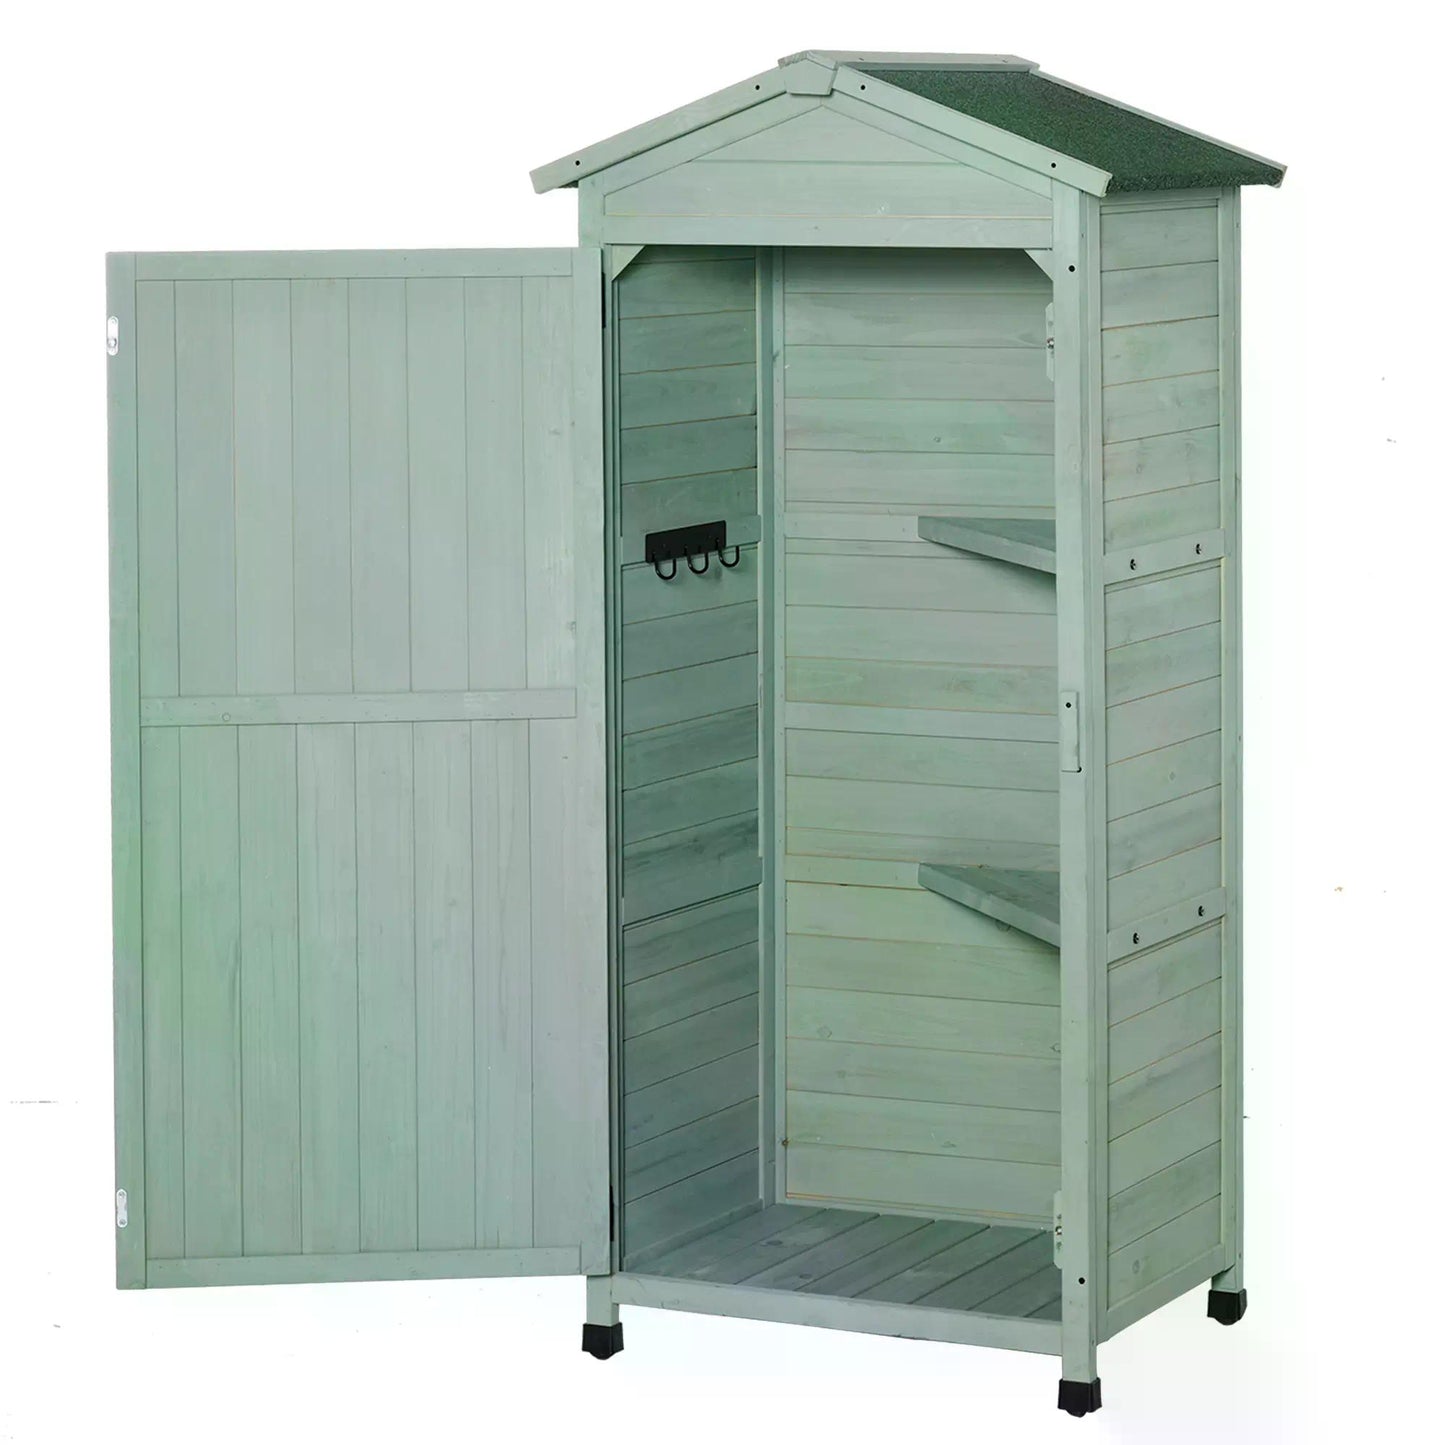 Outsunny Wooden Garden Shed, Outdoor Storage Cabinet with 2 Shelves and Hooks, Locking Organiser Outdoor Narrow Tool House, 74x55x155cm, Green